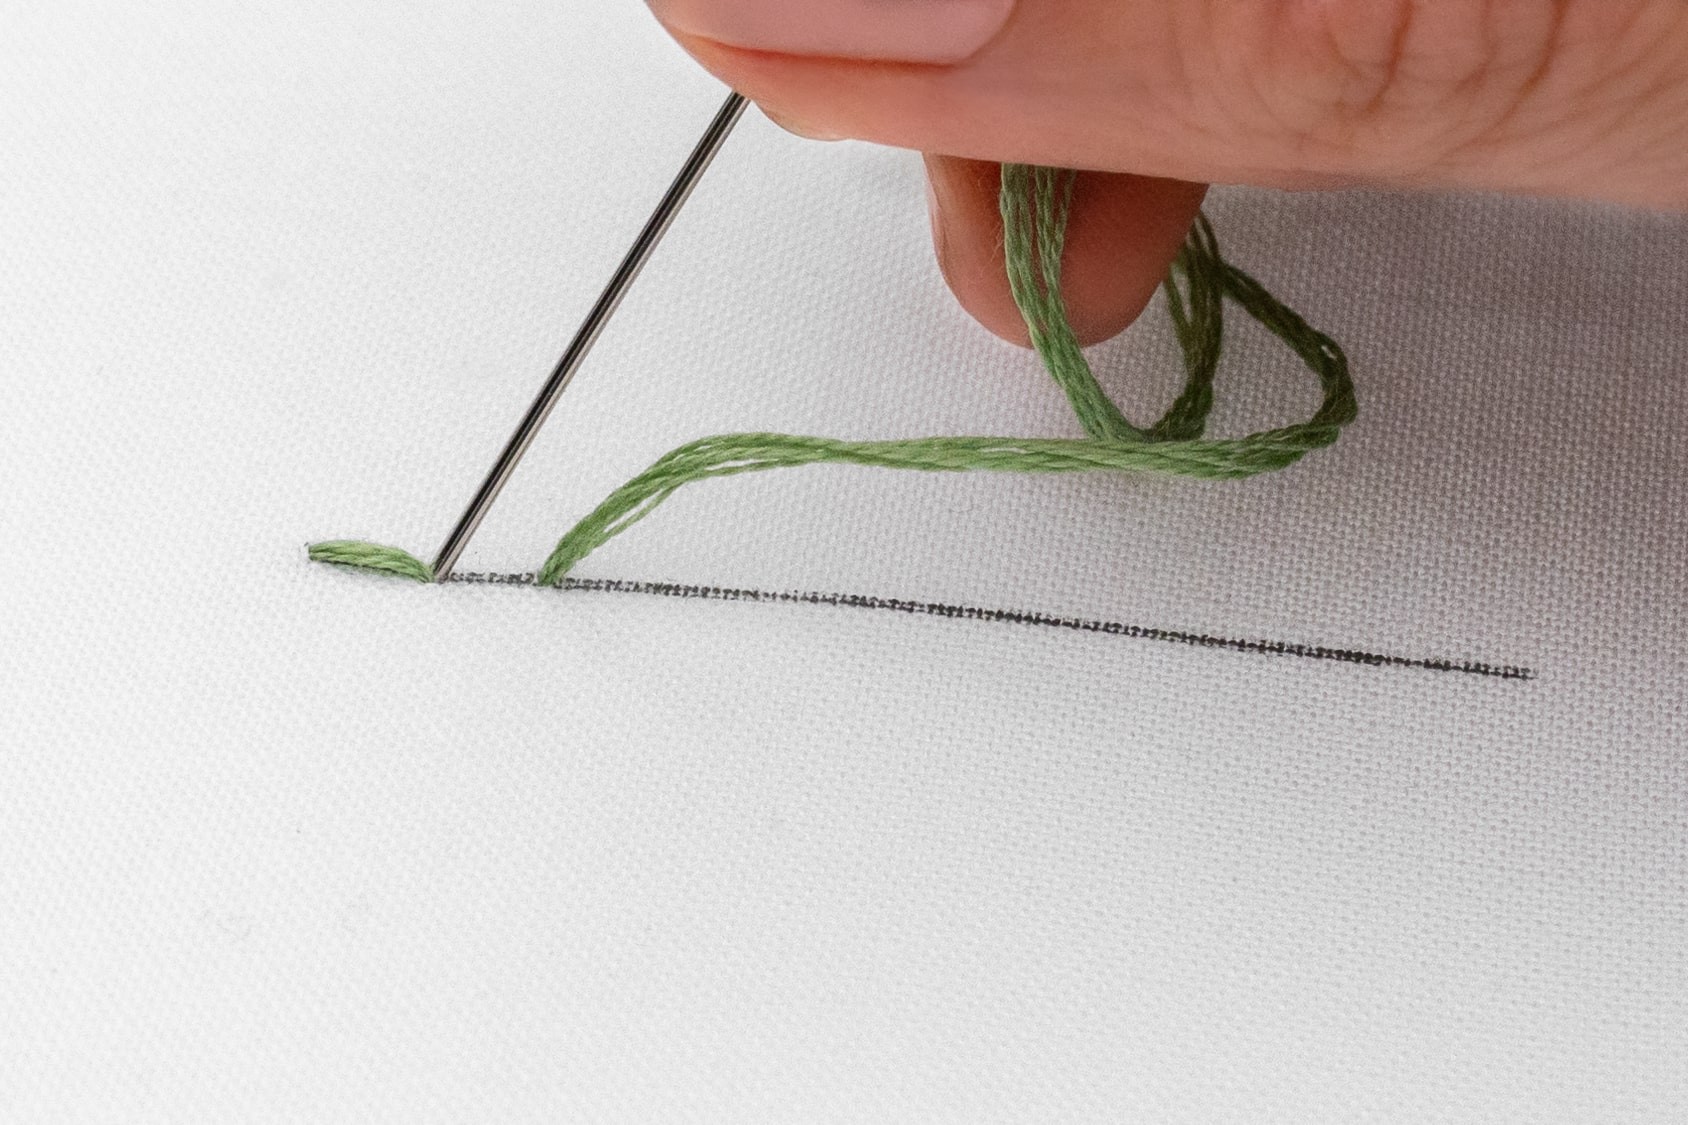 A needle is brought down to create a second stitch,